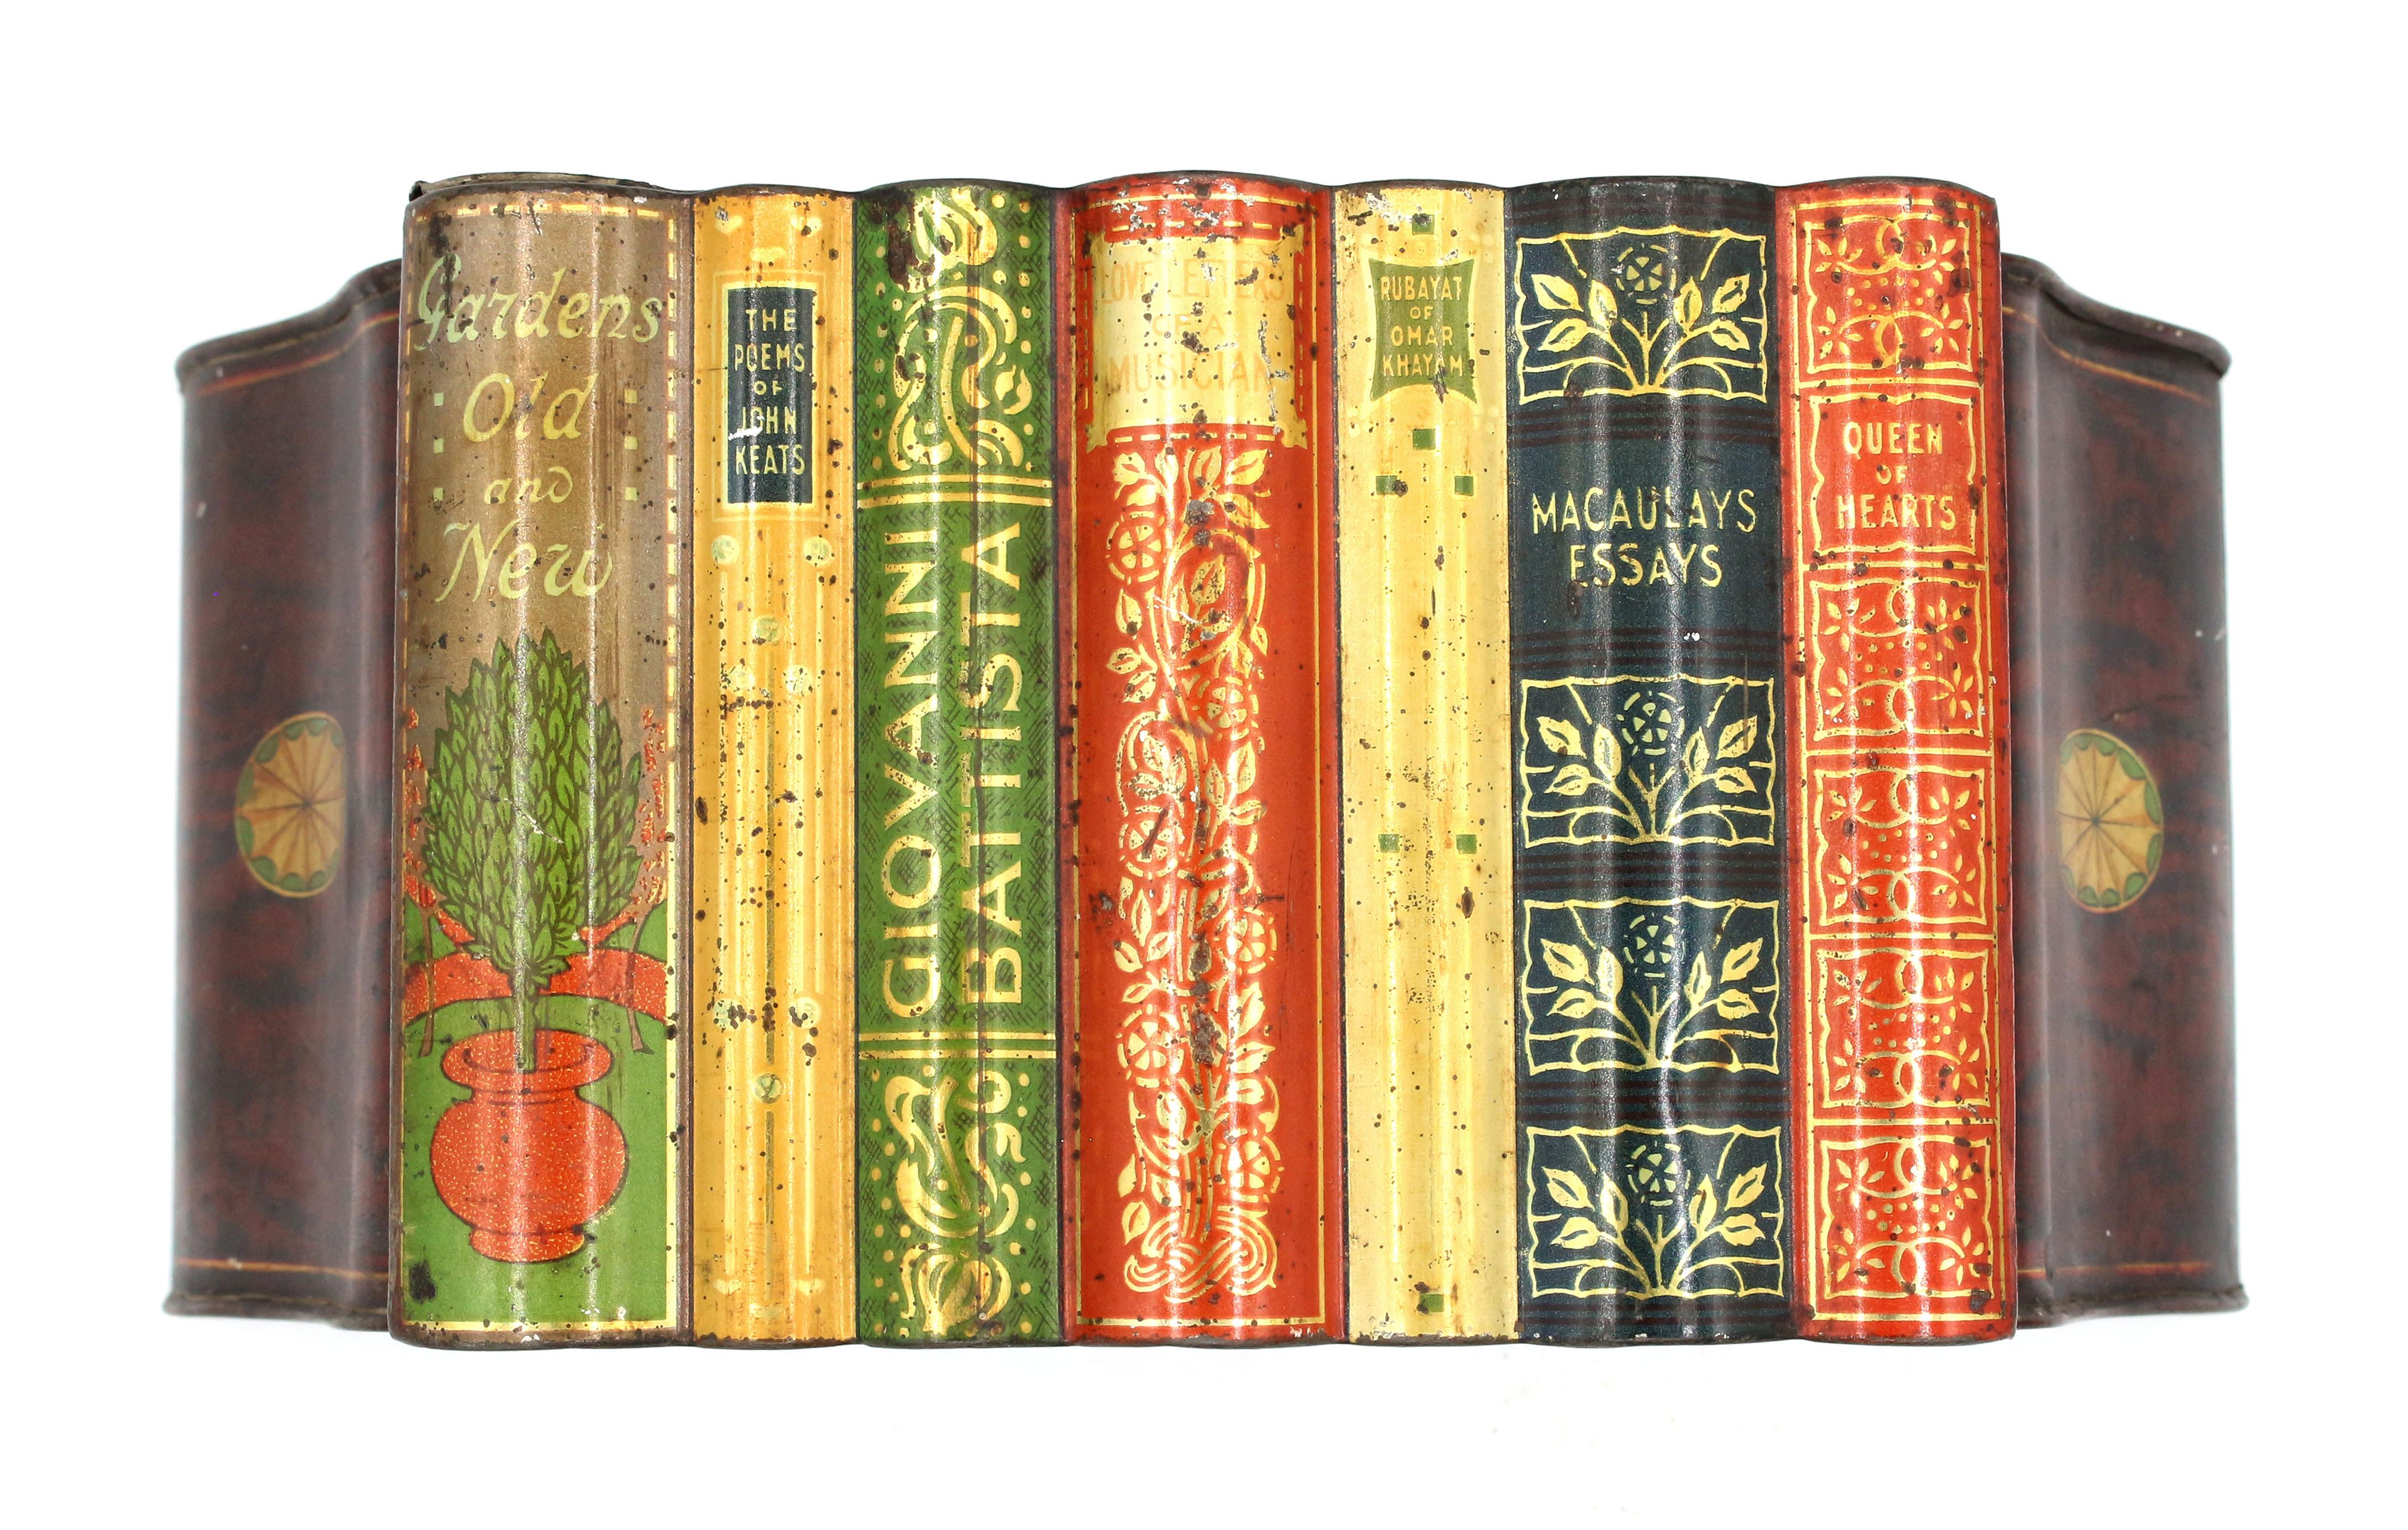 Books & bookends form biscuit tin box by Huntley & Palmers, early 20th century, English. Faux rack of books between waterfall faux mahogany & paterae inlaid bookends. Various book titles well decorated with colorful paint & gilt.  Overall good